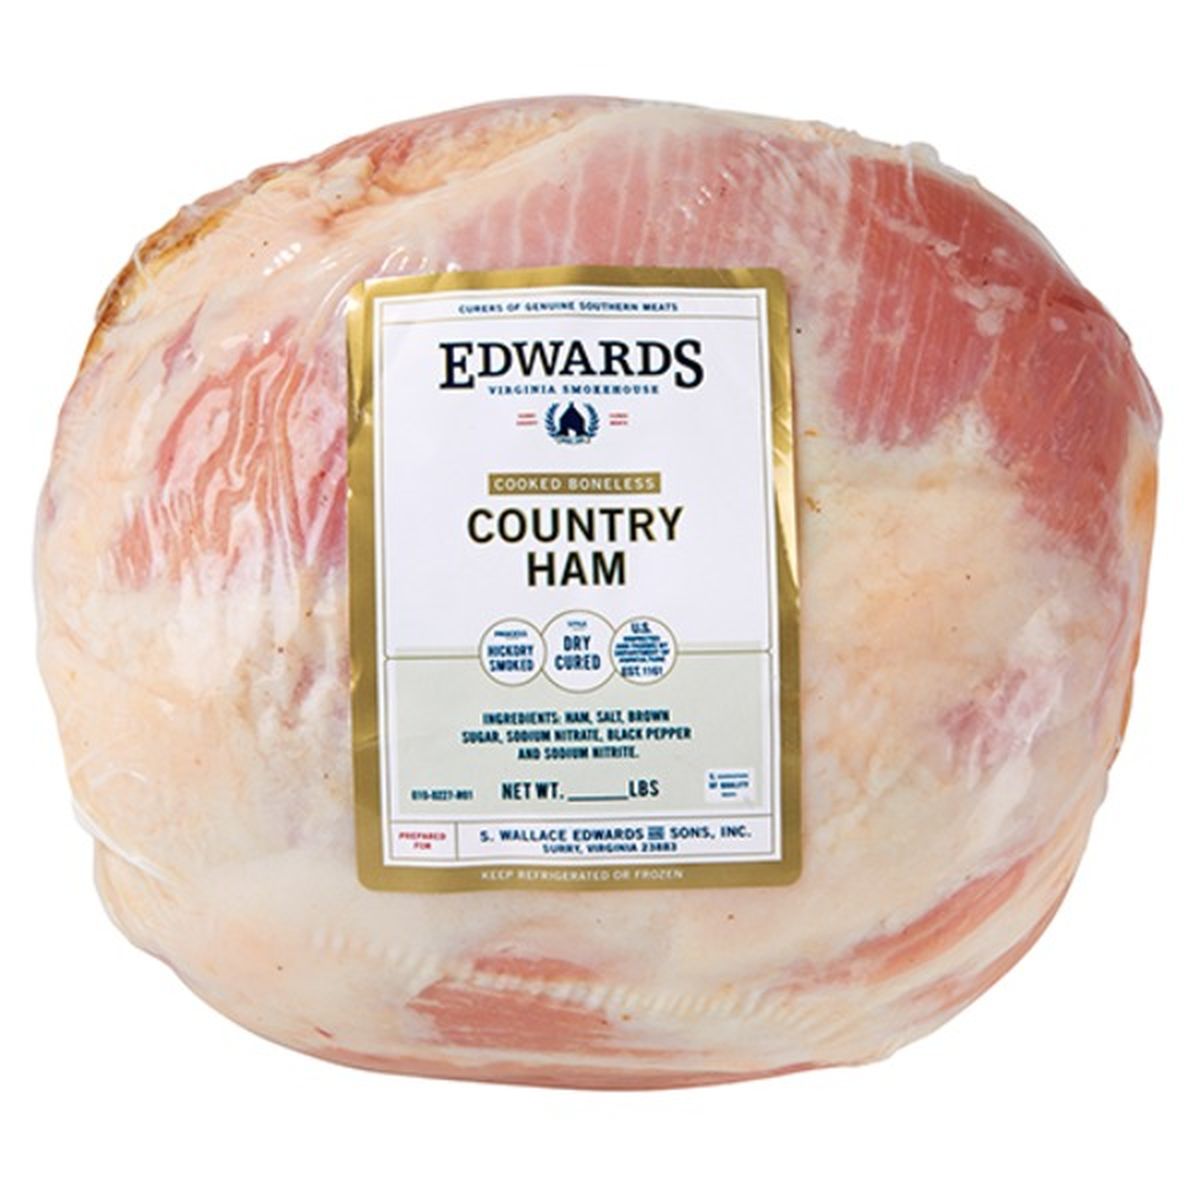 Calories in S. Wallace Edwards & Sons Country Ham